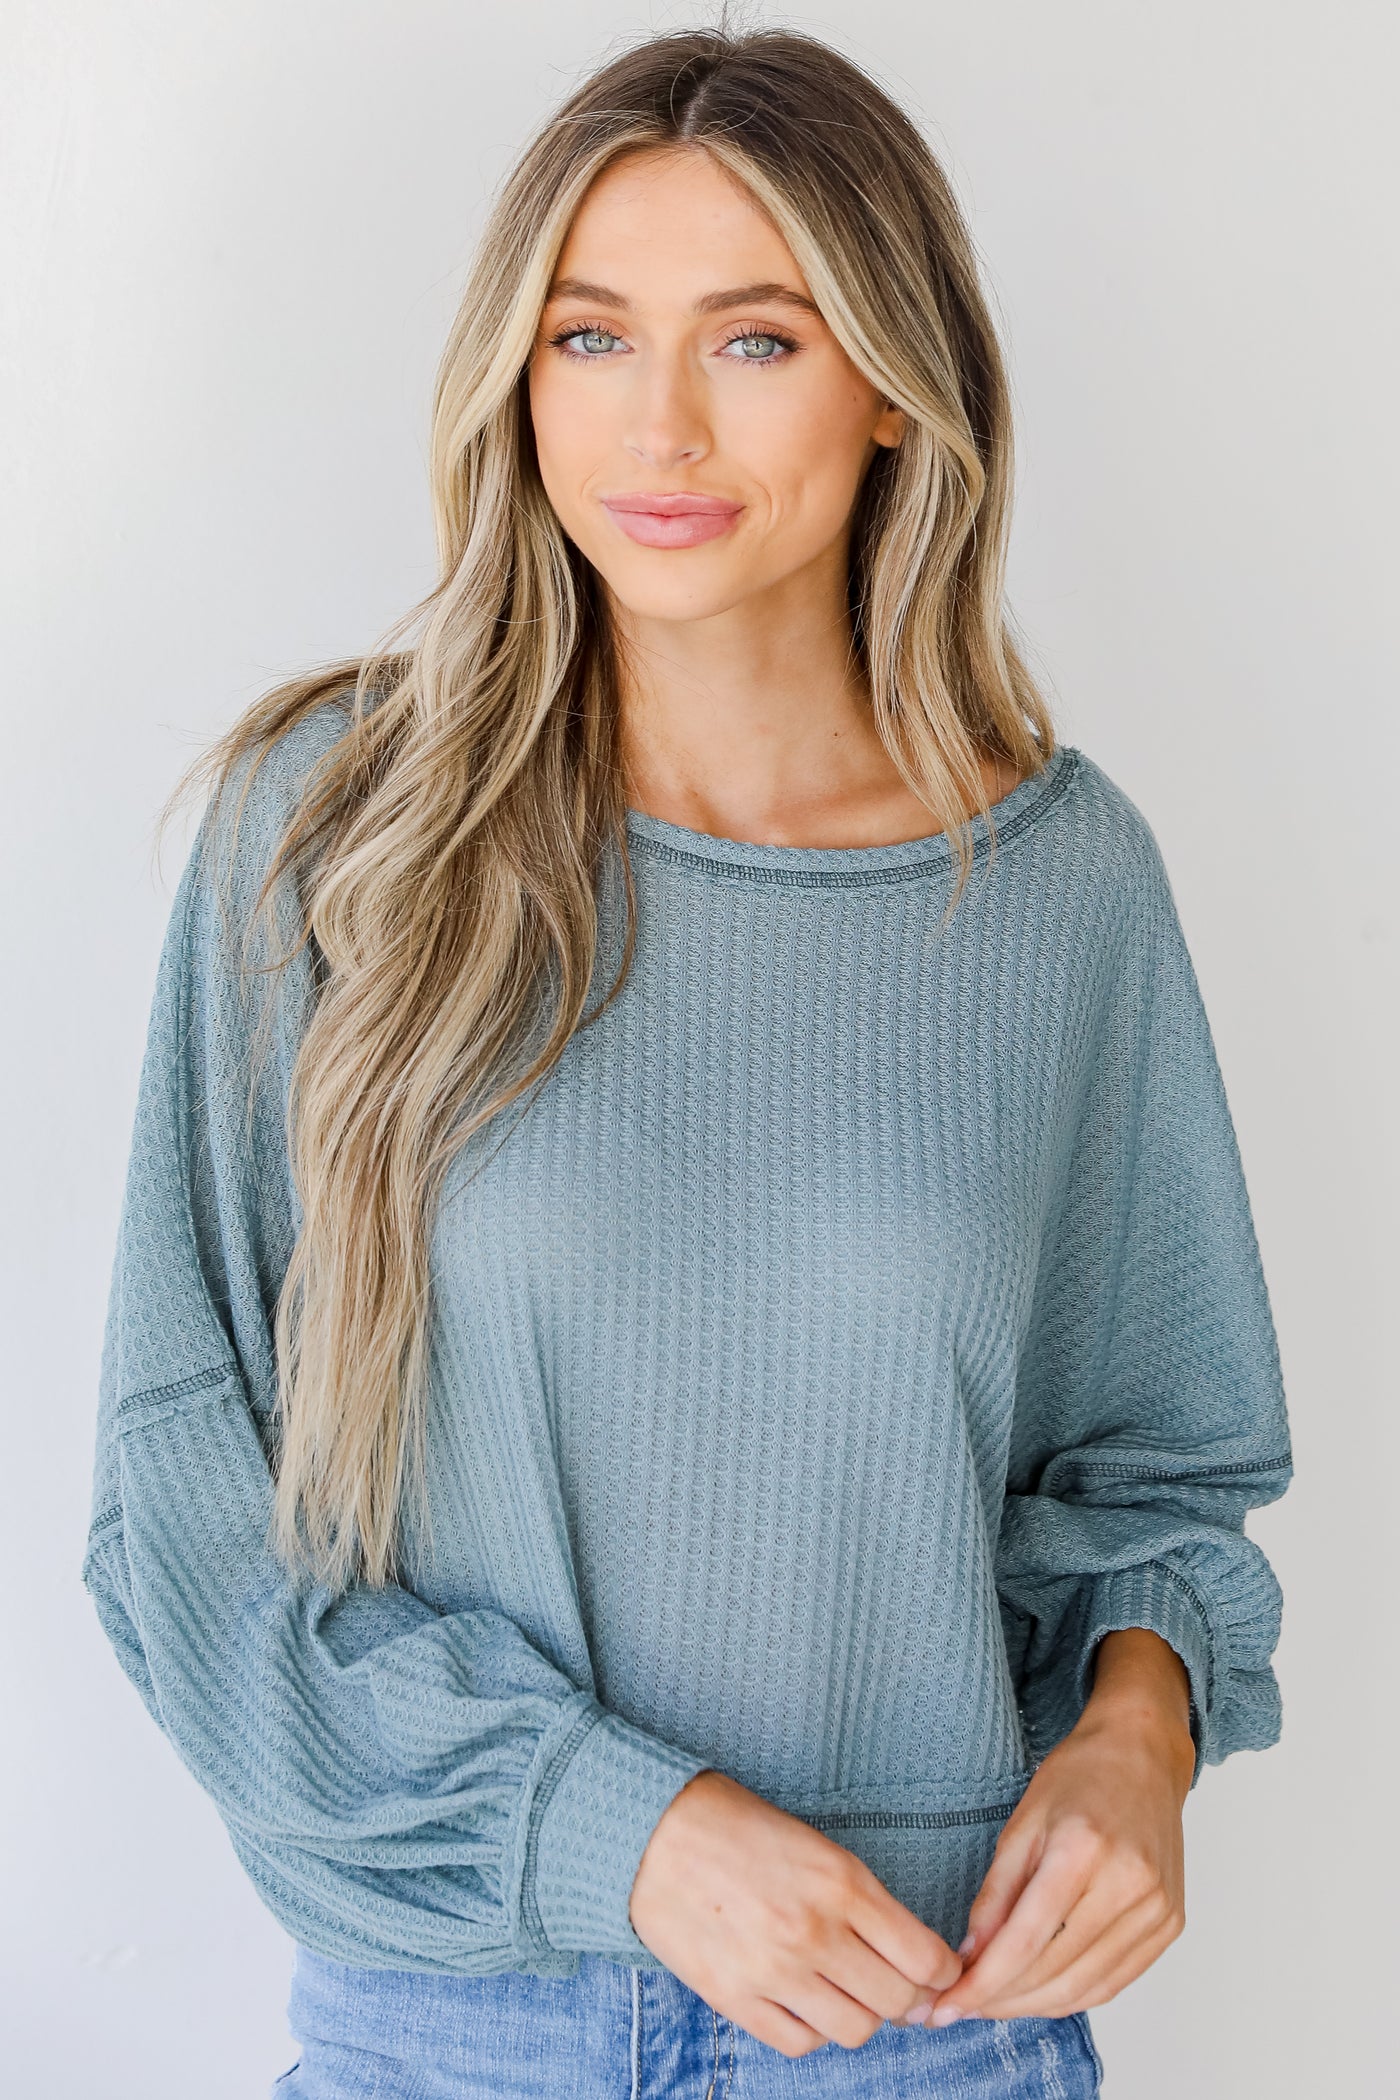 Waffle Knit Top in light blue front view